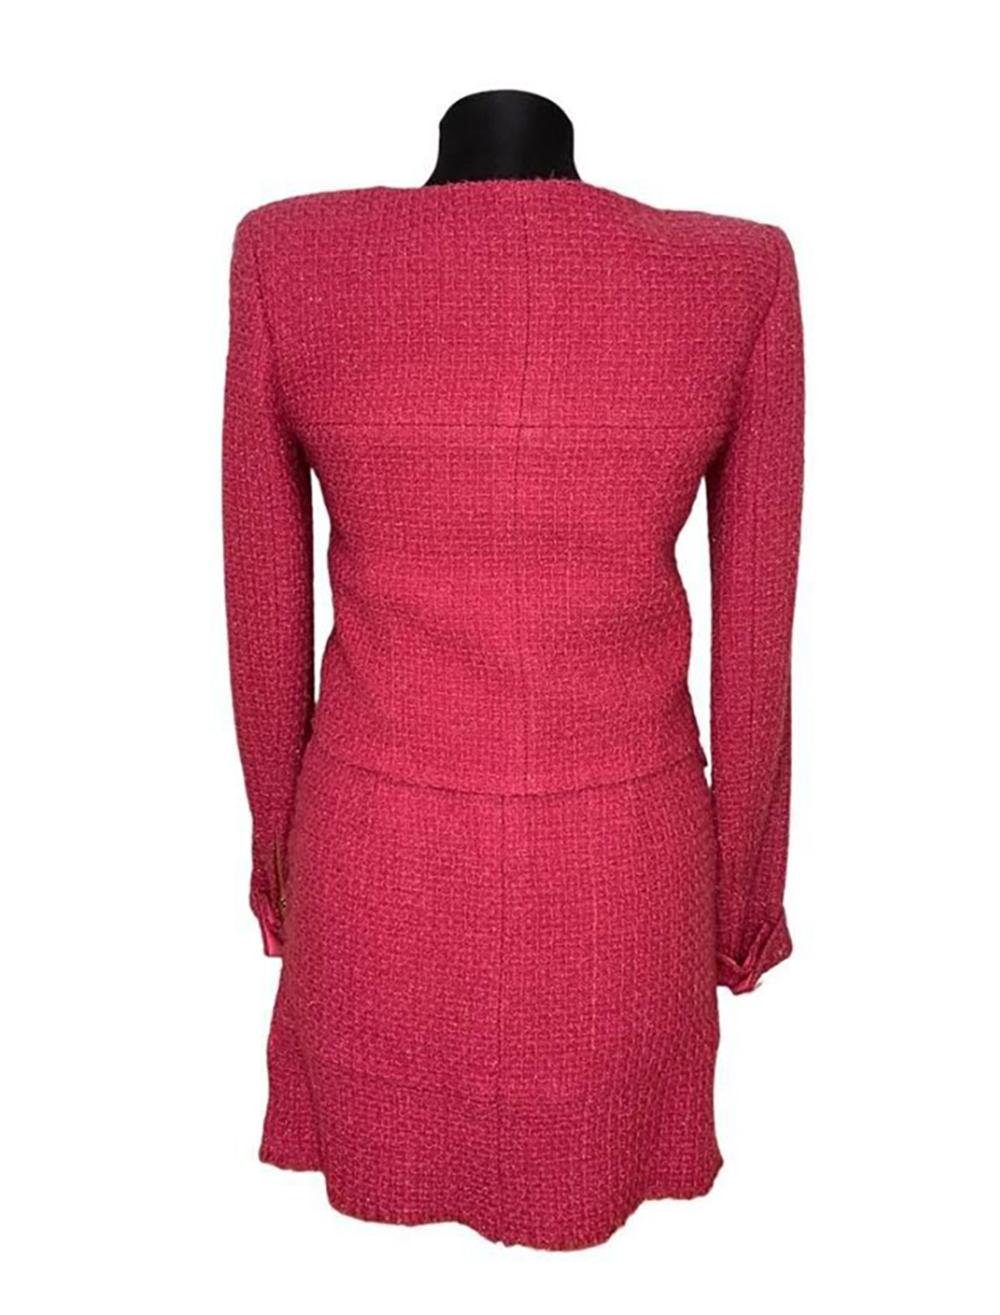 Chanel Ad Campaign Lesage Tweed Jacket and Skirt Ensemble For Sale 5